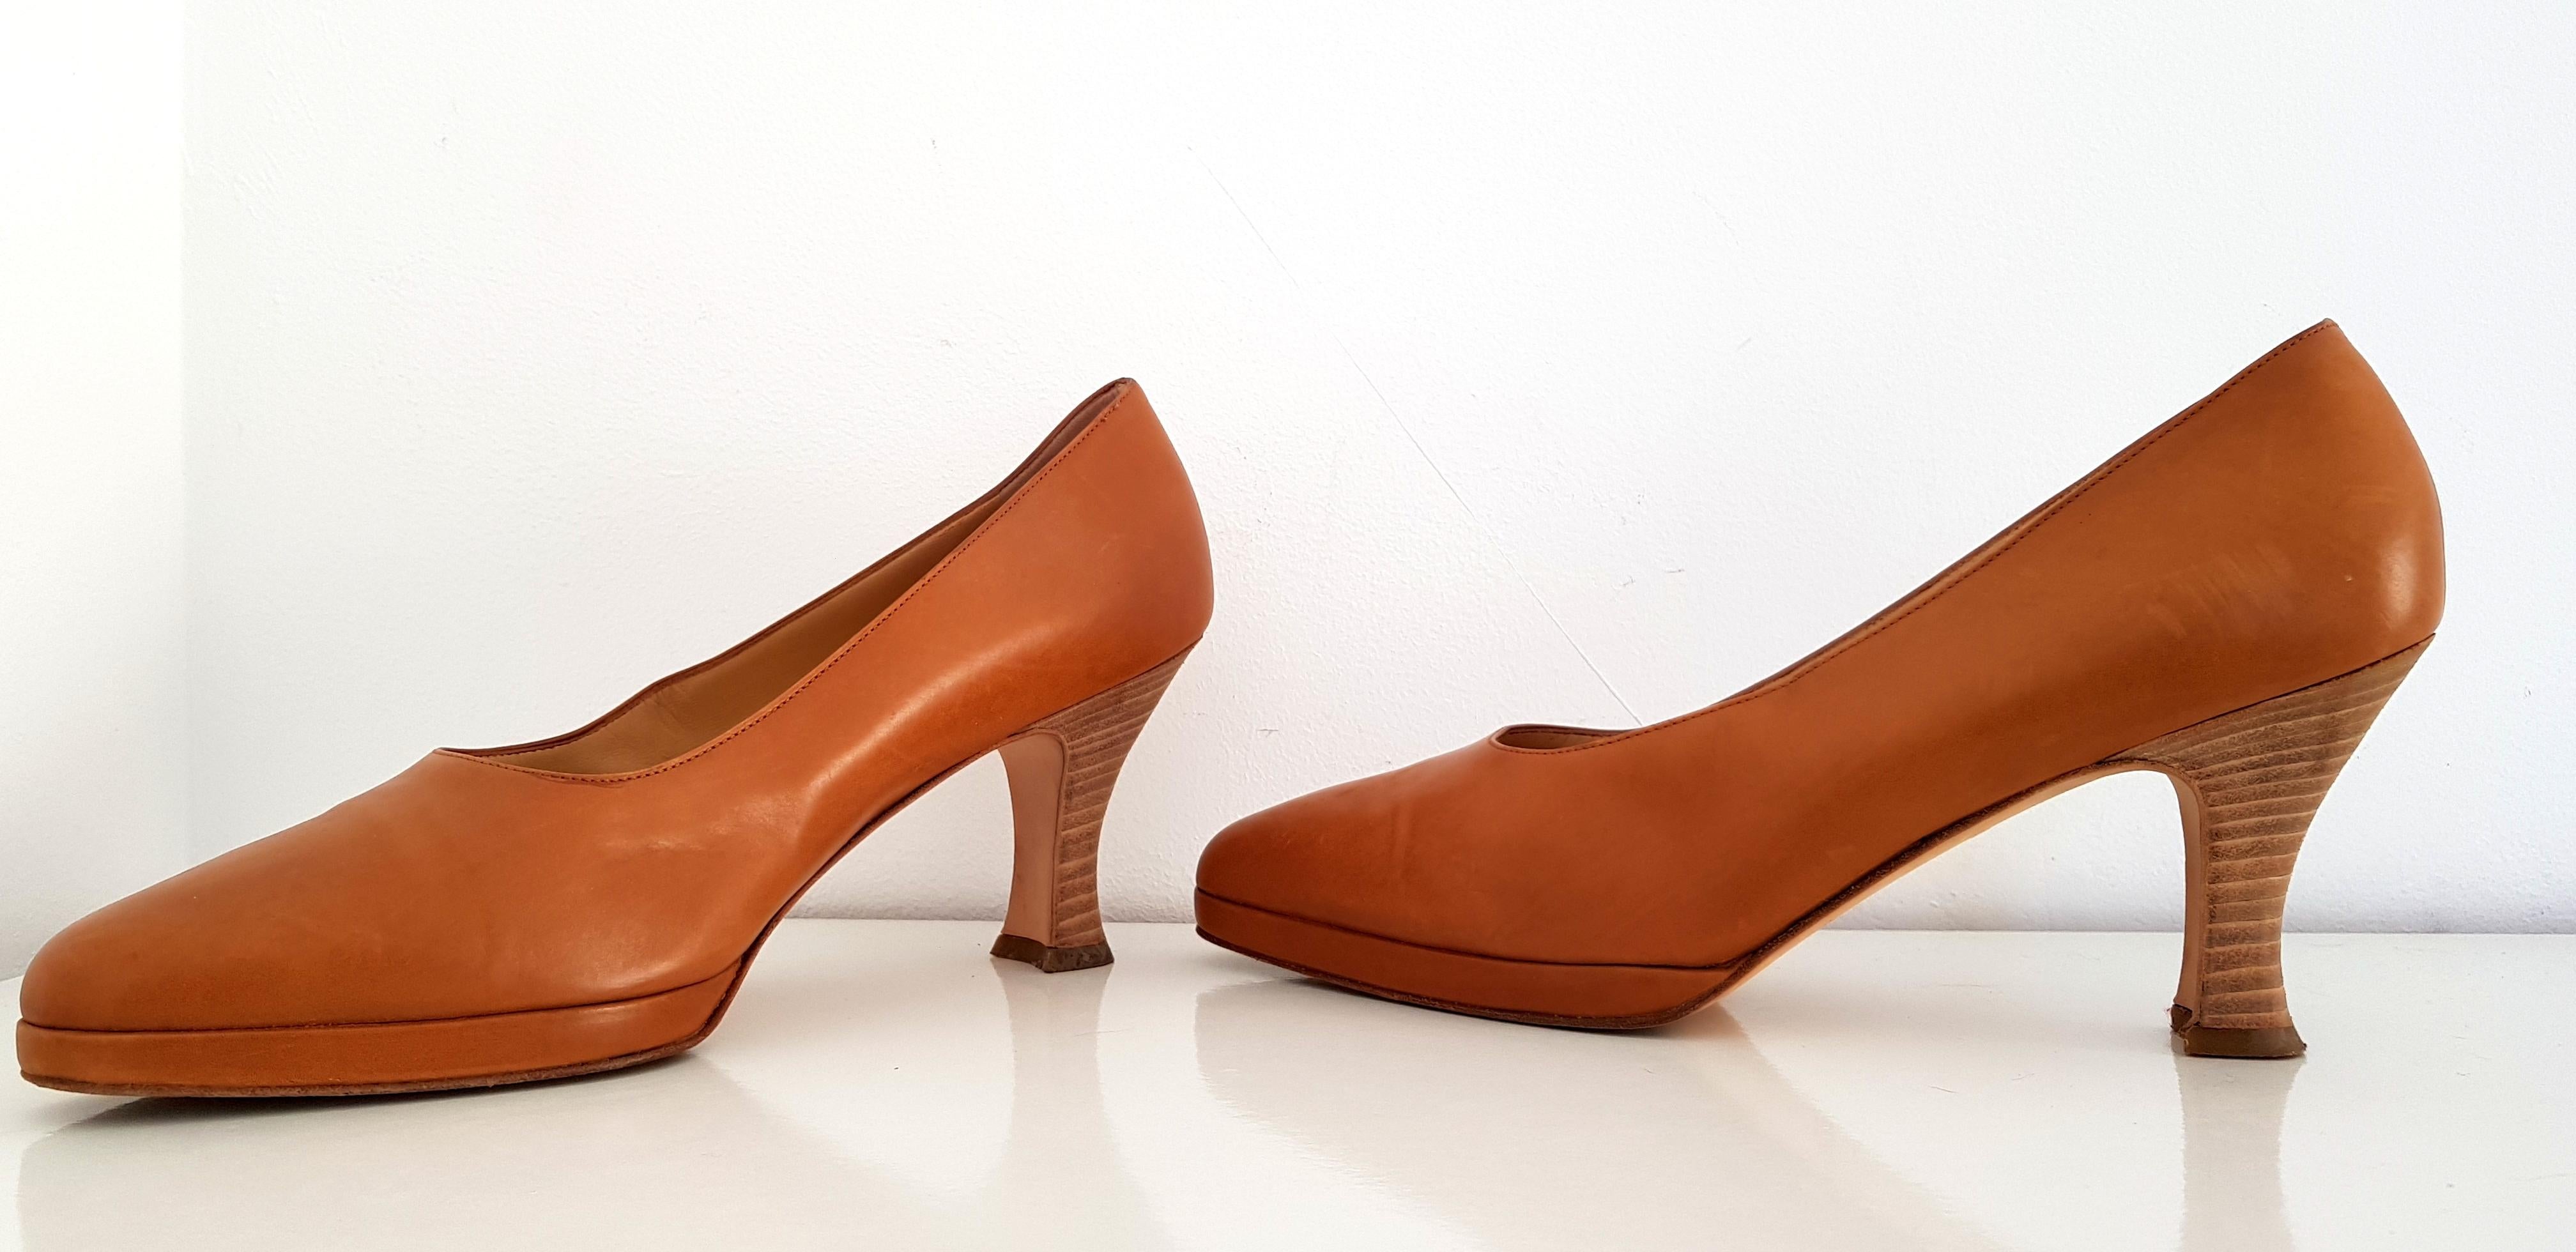 Prada Leather Heels. 
Color Camel
Heel height: 8 cm
Conditions: Medium
Size 40
Made in Italy